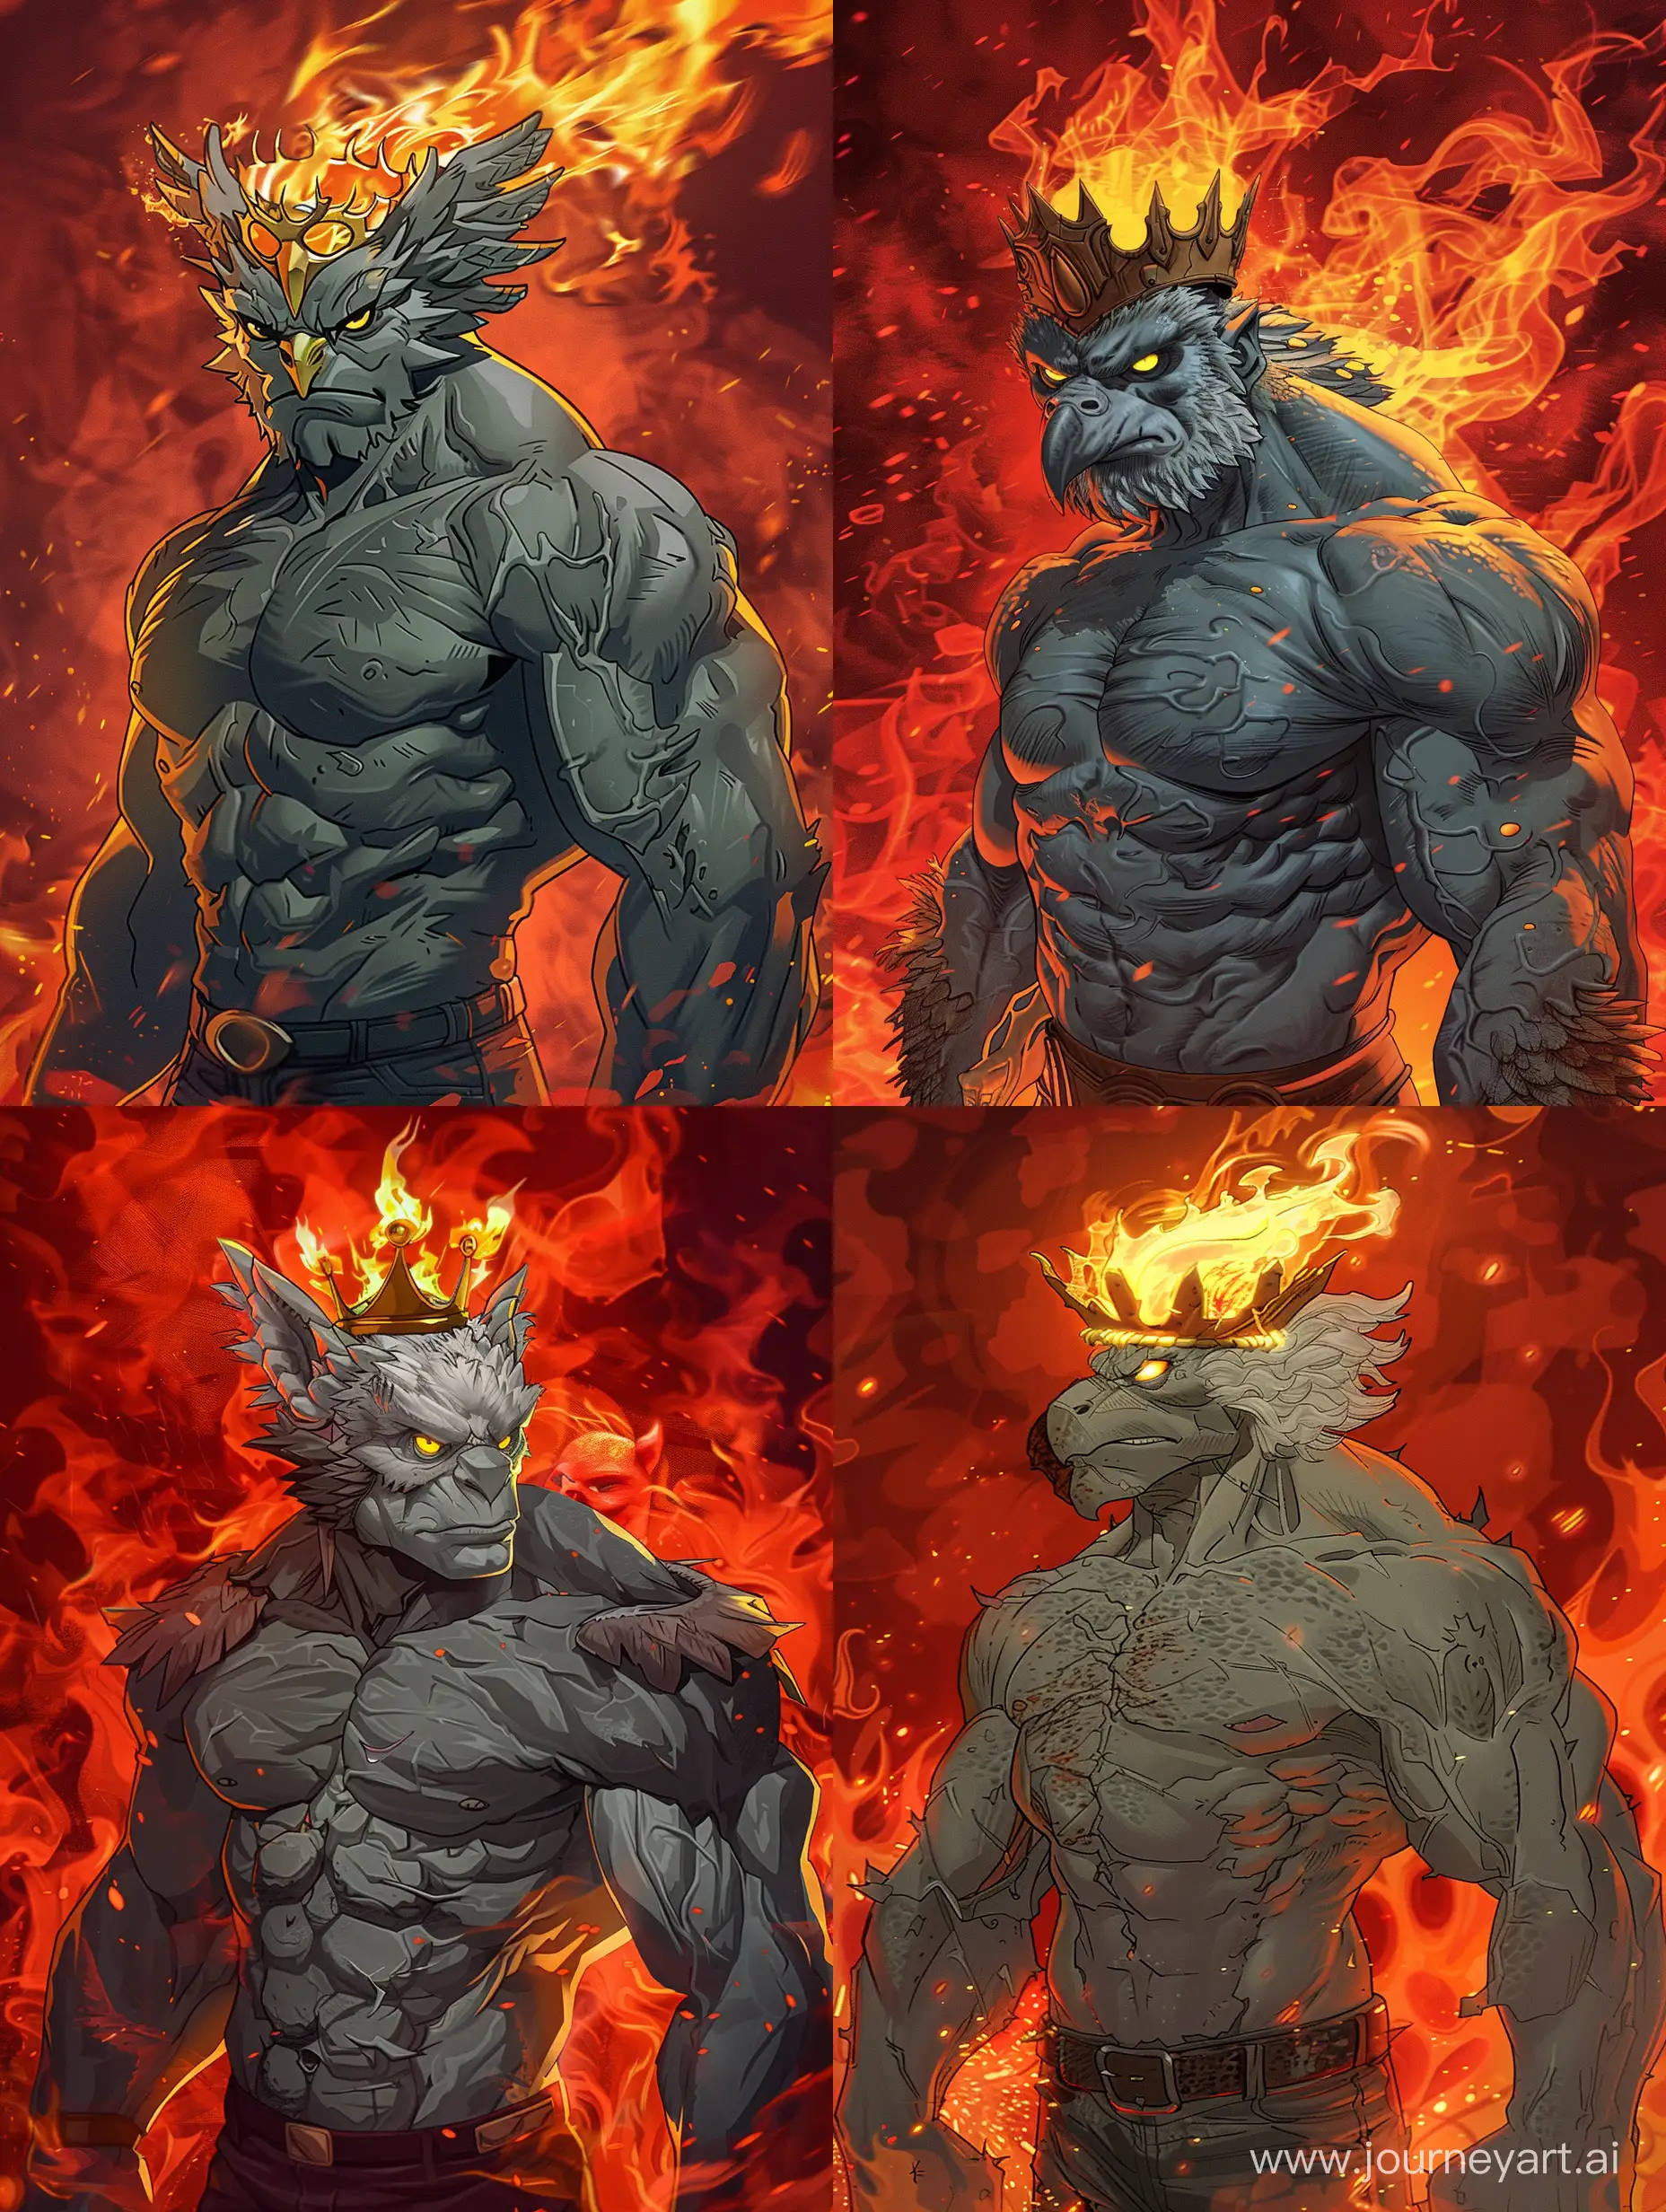 digital drawing of a man with a strong body like the hulk with grey skin, harpy eagle head with bright yellow eyes, a crown of fire like hellboys over his head, and a red firey background as if he was in hell